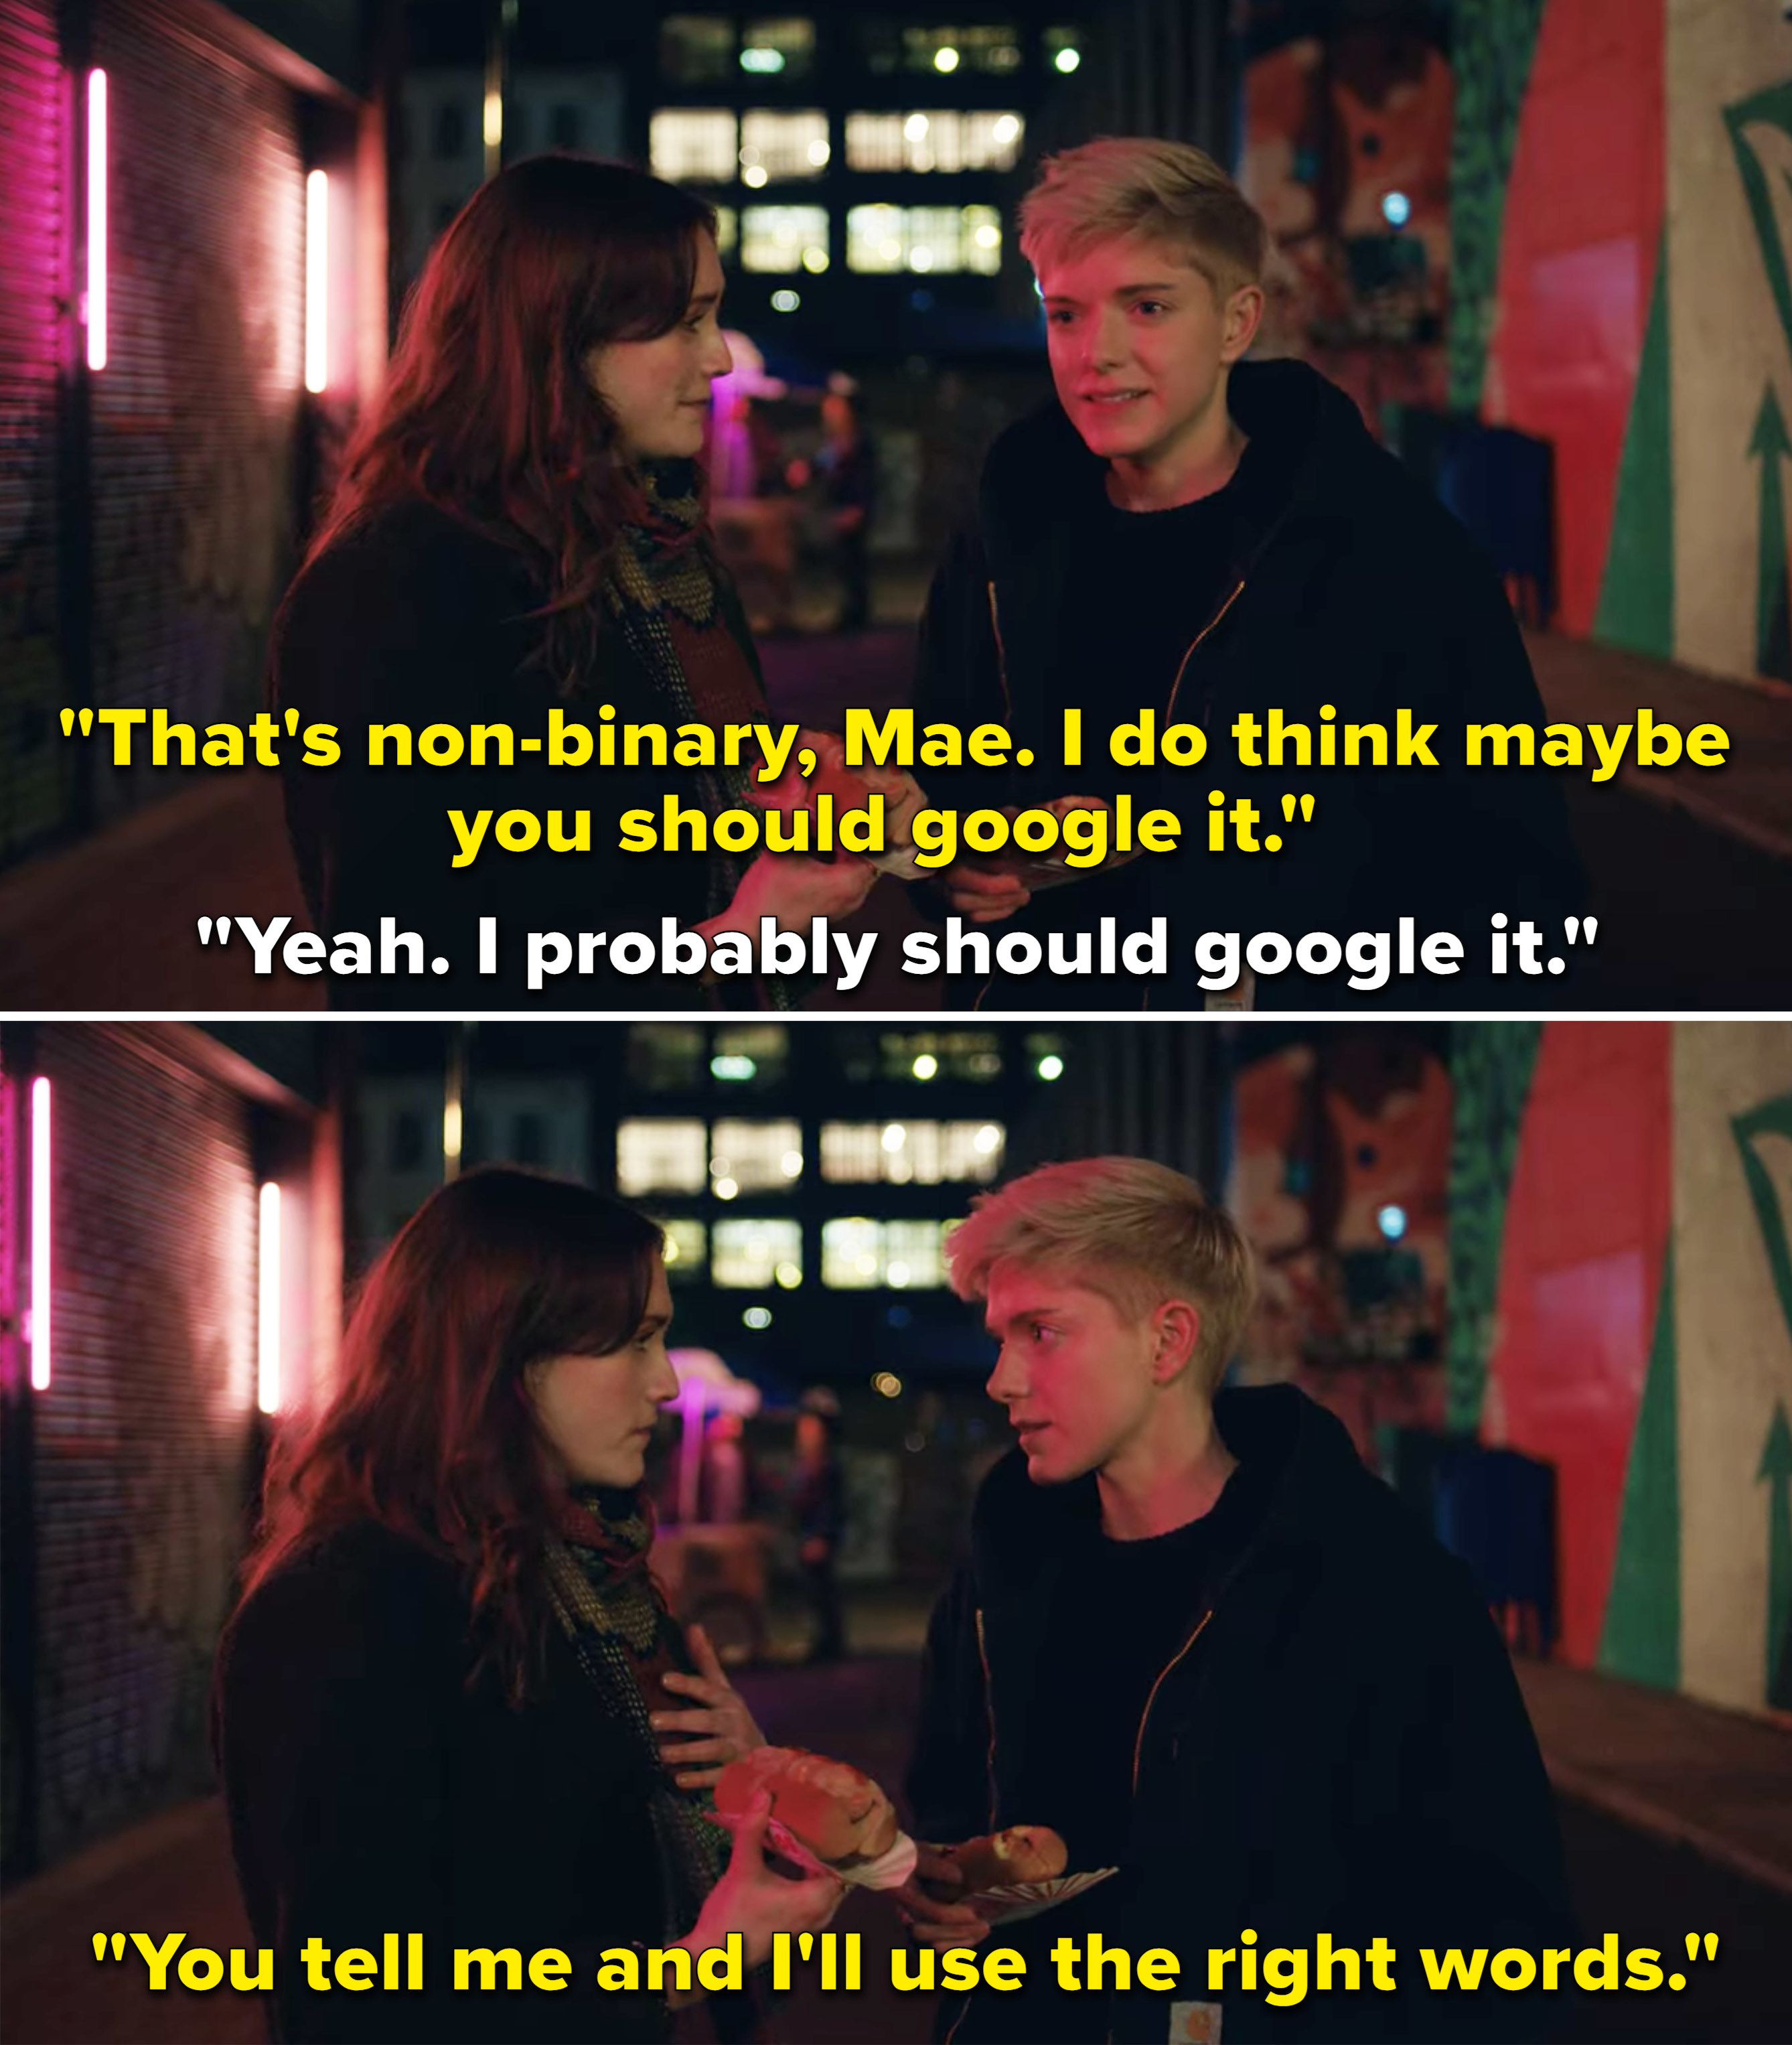 George telling Mae that whatever labels they want to use, she&#x27;s good with